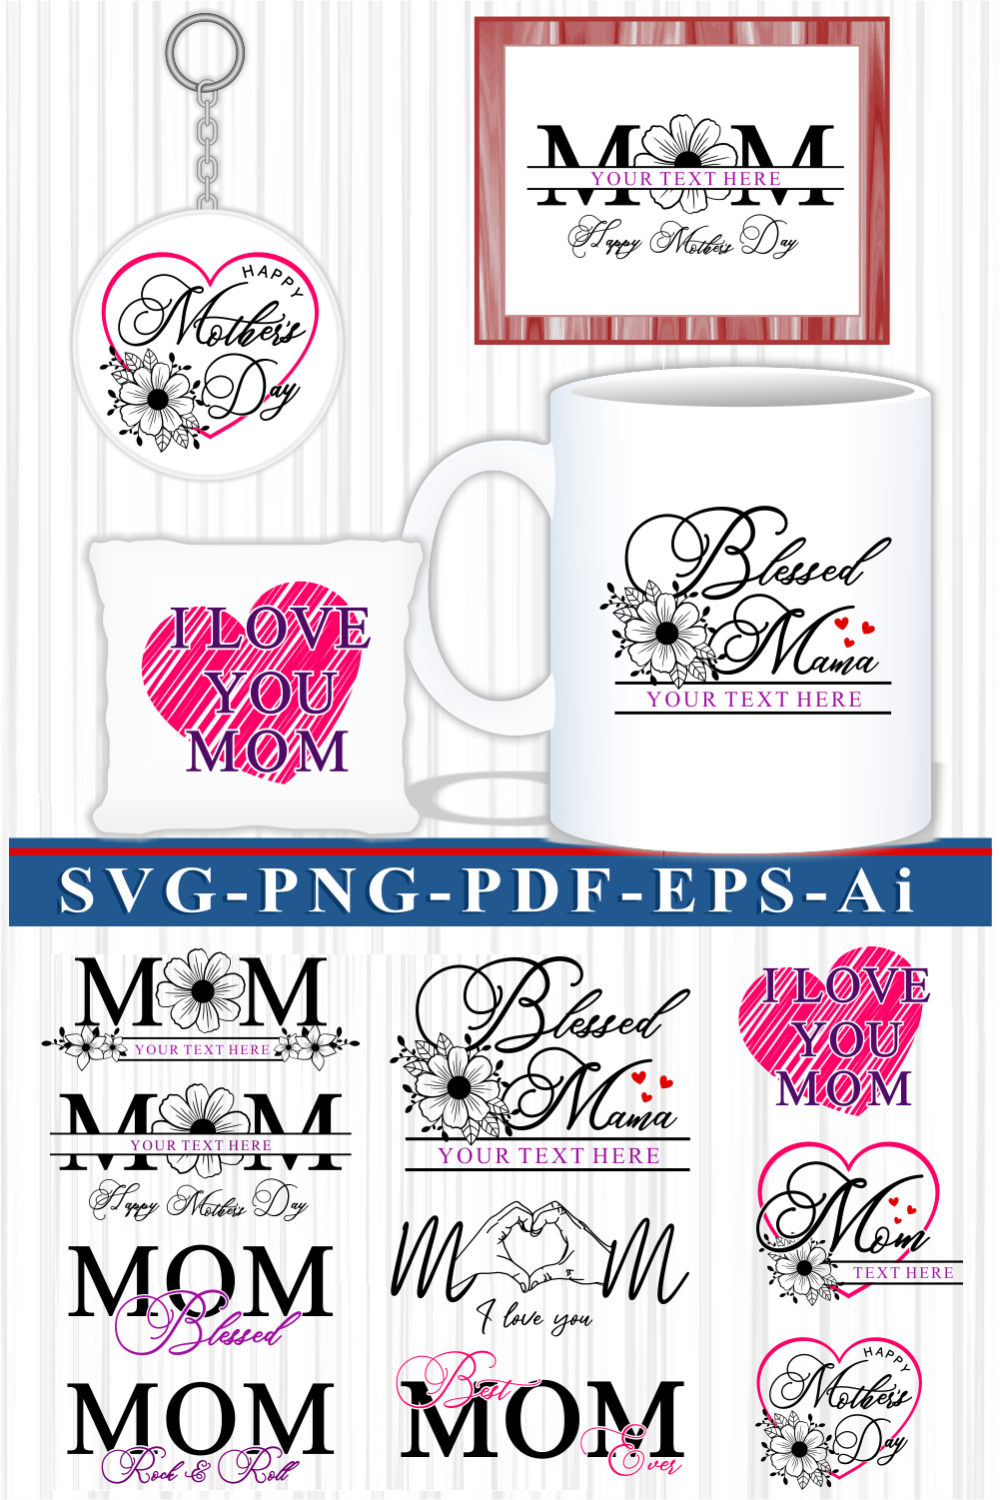 Mothers Day SVG Bundle, Mothers Day Sublimation Bundle, Quotes, Inspirational, Motivational, Mom, Sayings, Mother, Mama, Mum, Mommy, Sign, Signs, Split monogram, split, mom split, SVG File, Mom Bundle, Split Monogram, Love, I Love You, Heart, Flowers SVG, Happy Mother's Day, Keychain SVG Designs, Mug Sublimation Designs, Bundle, Sublimation, SVG Design, Designs pinterest preview image.